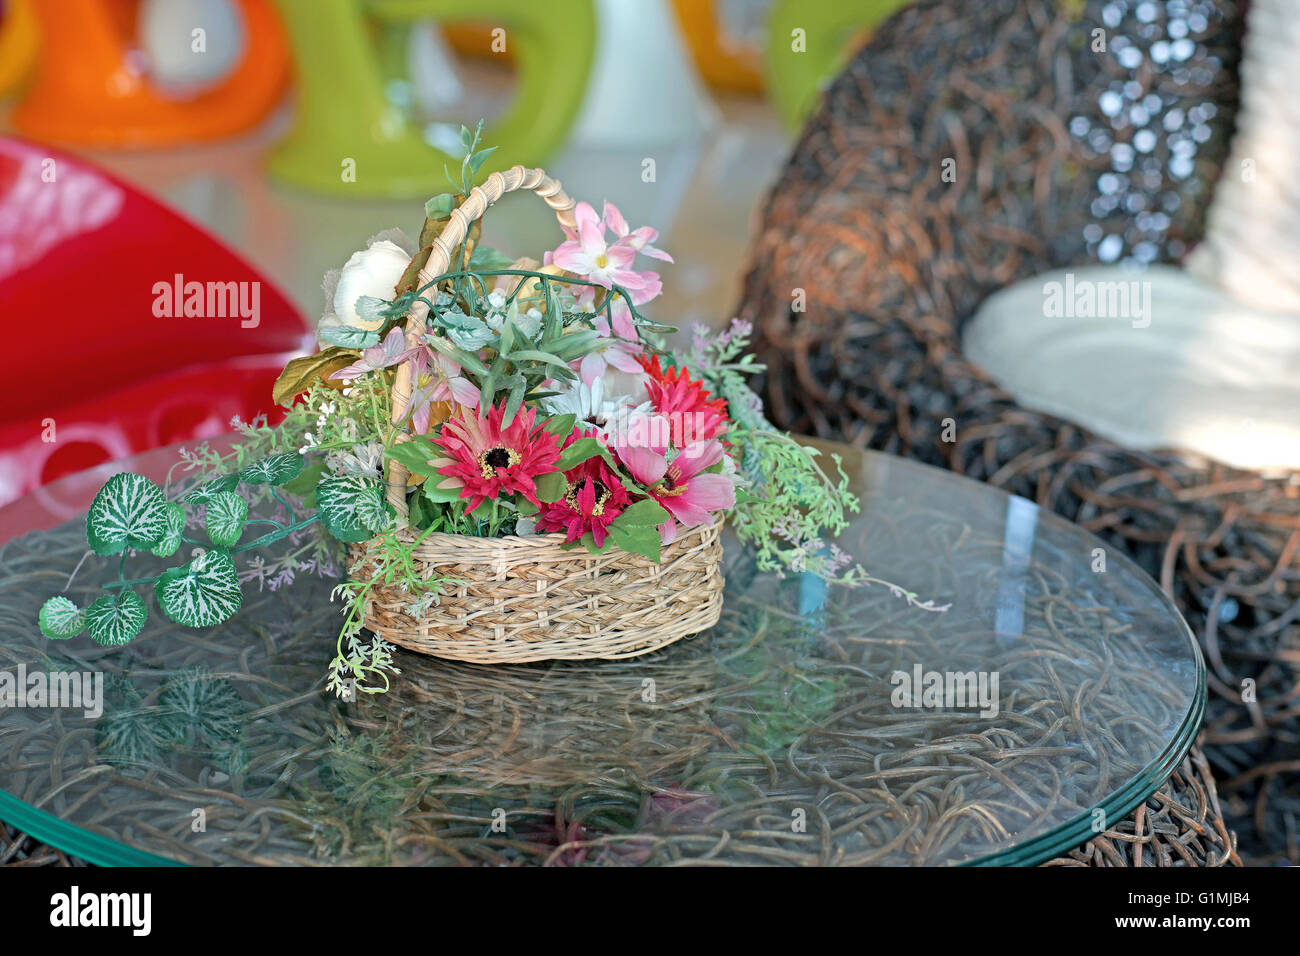 colorful artificial flower in basket on the table Stock Photo